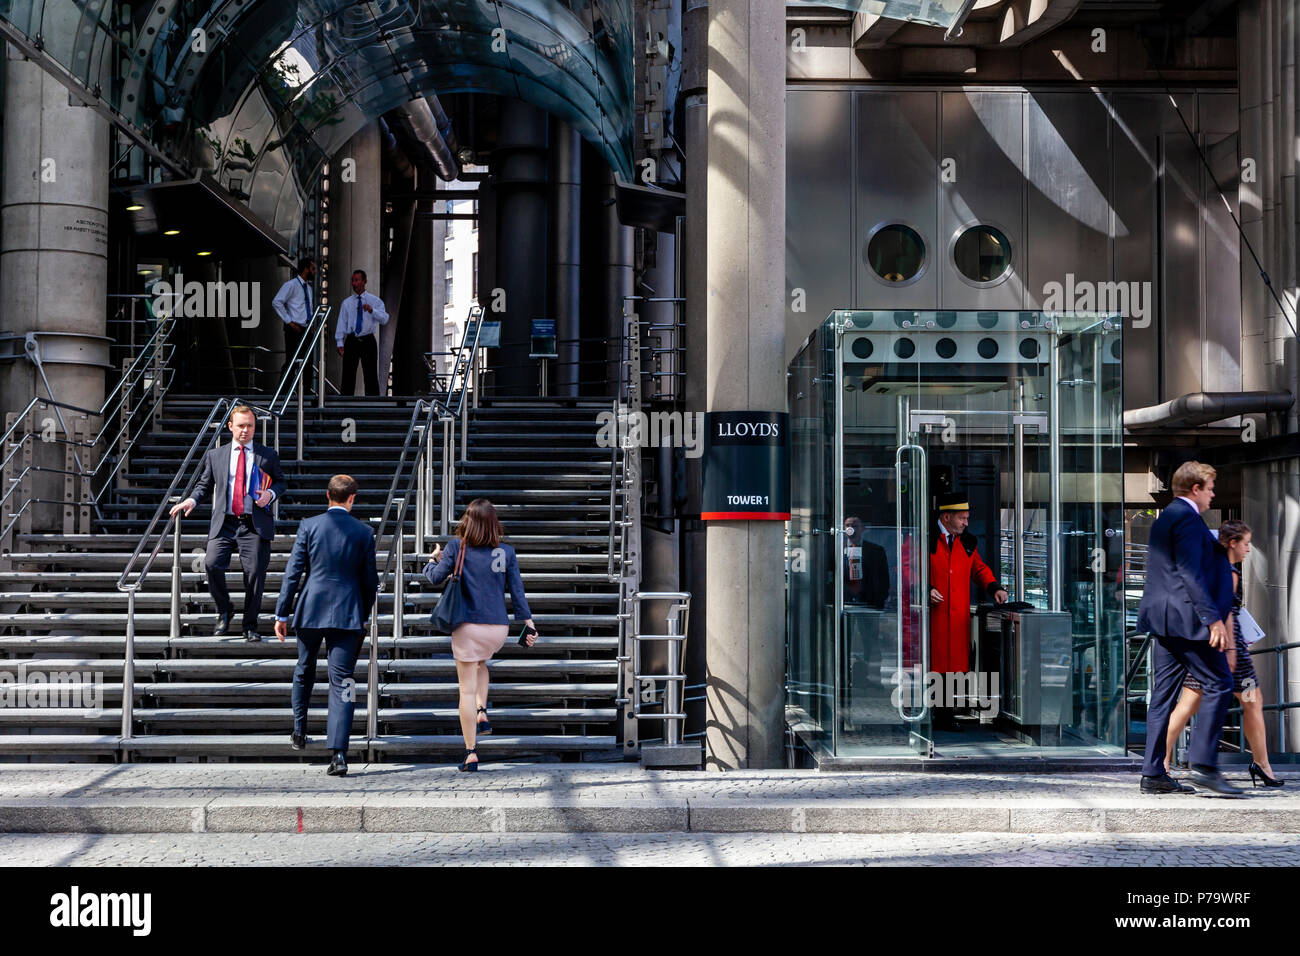 The Entrance To The Lloyd’s Building, London, England Stock Photo